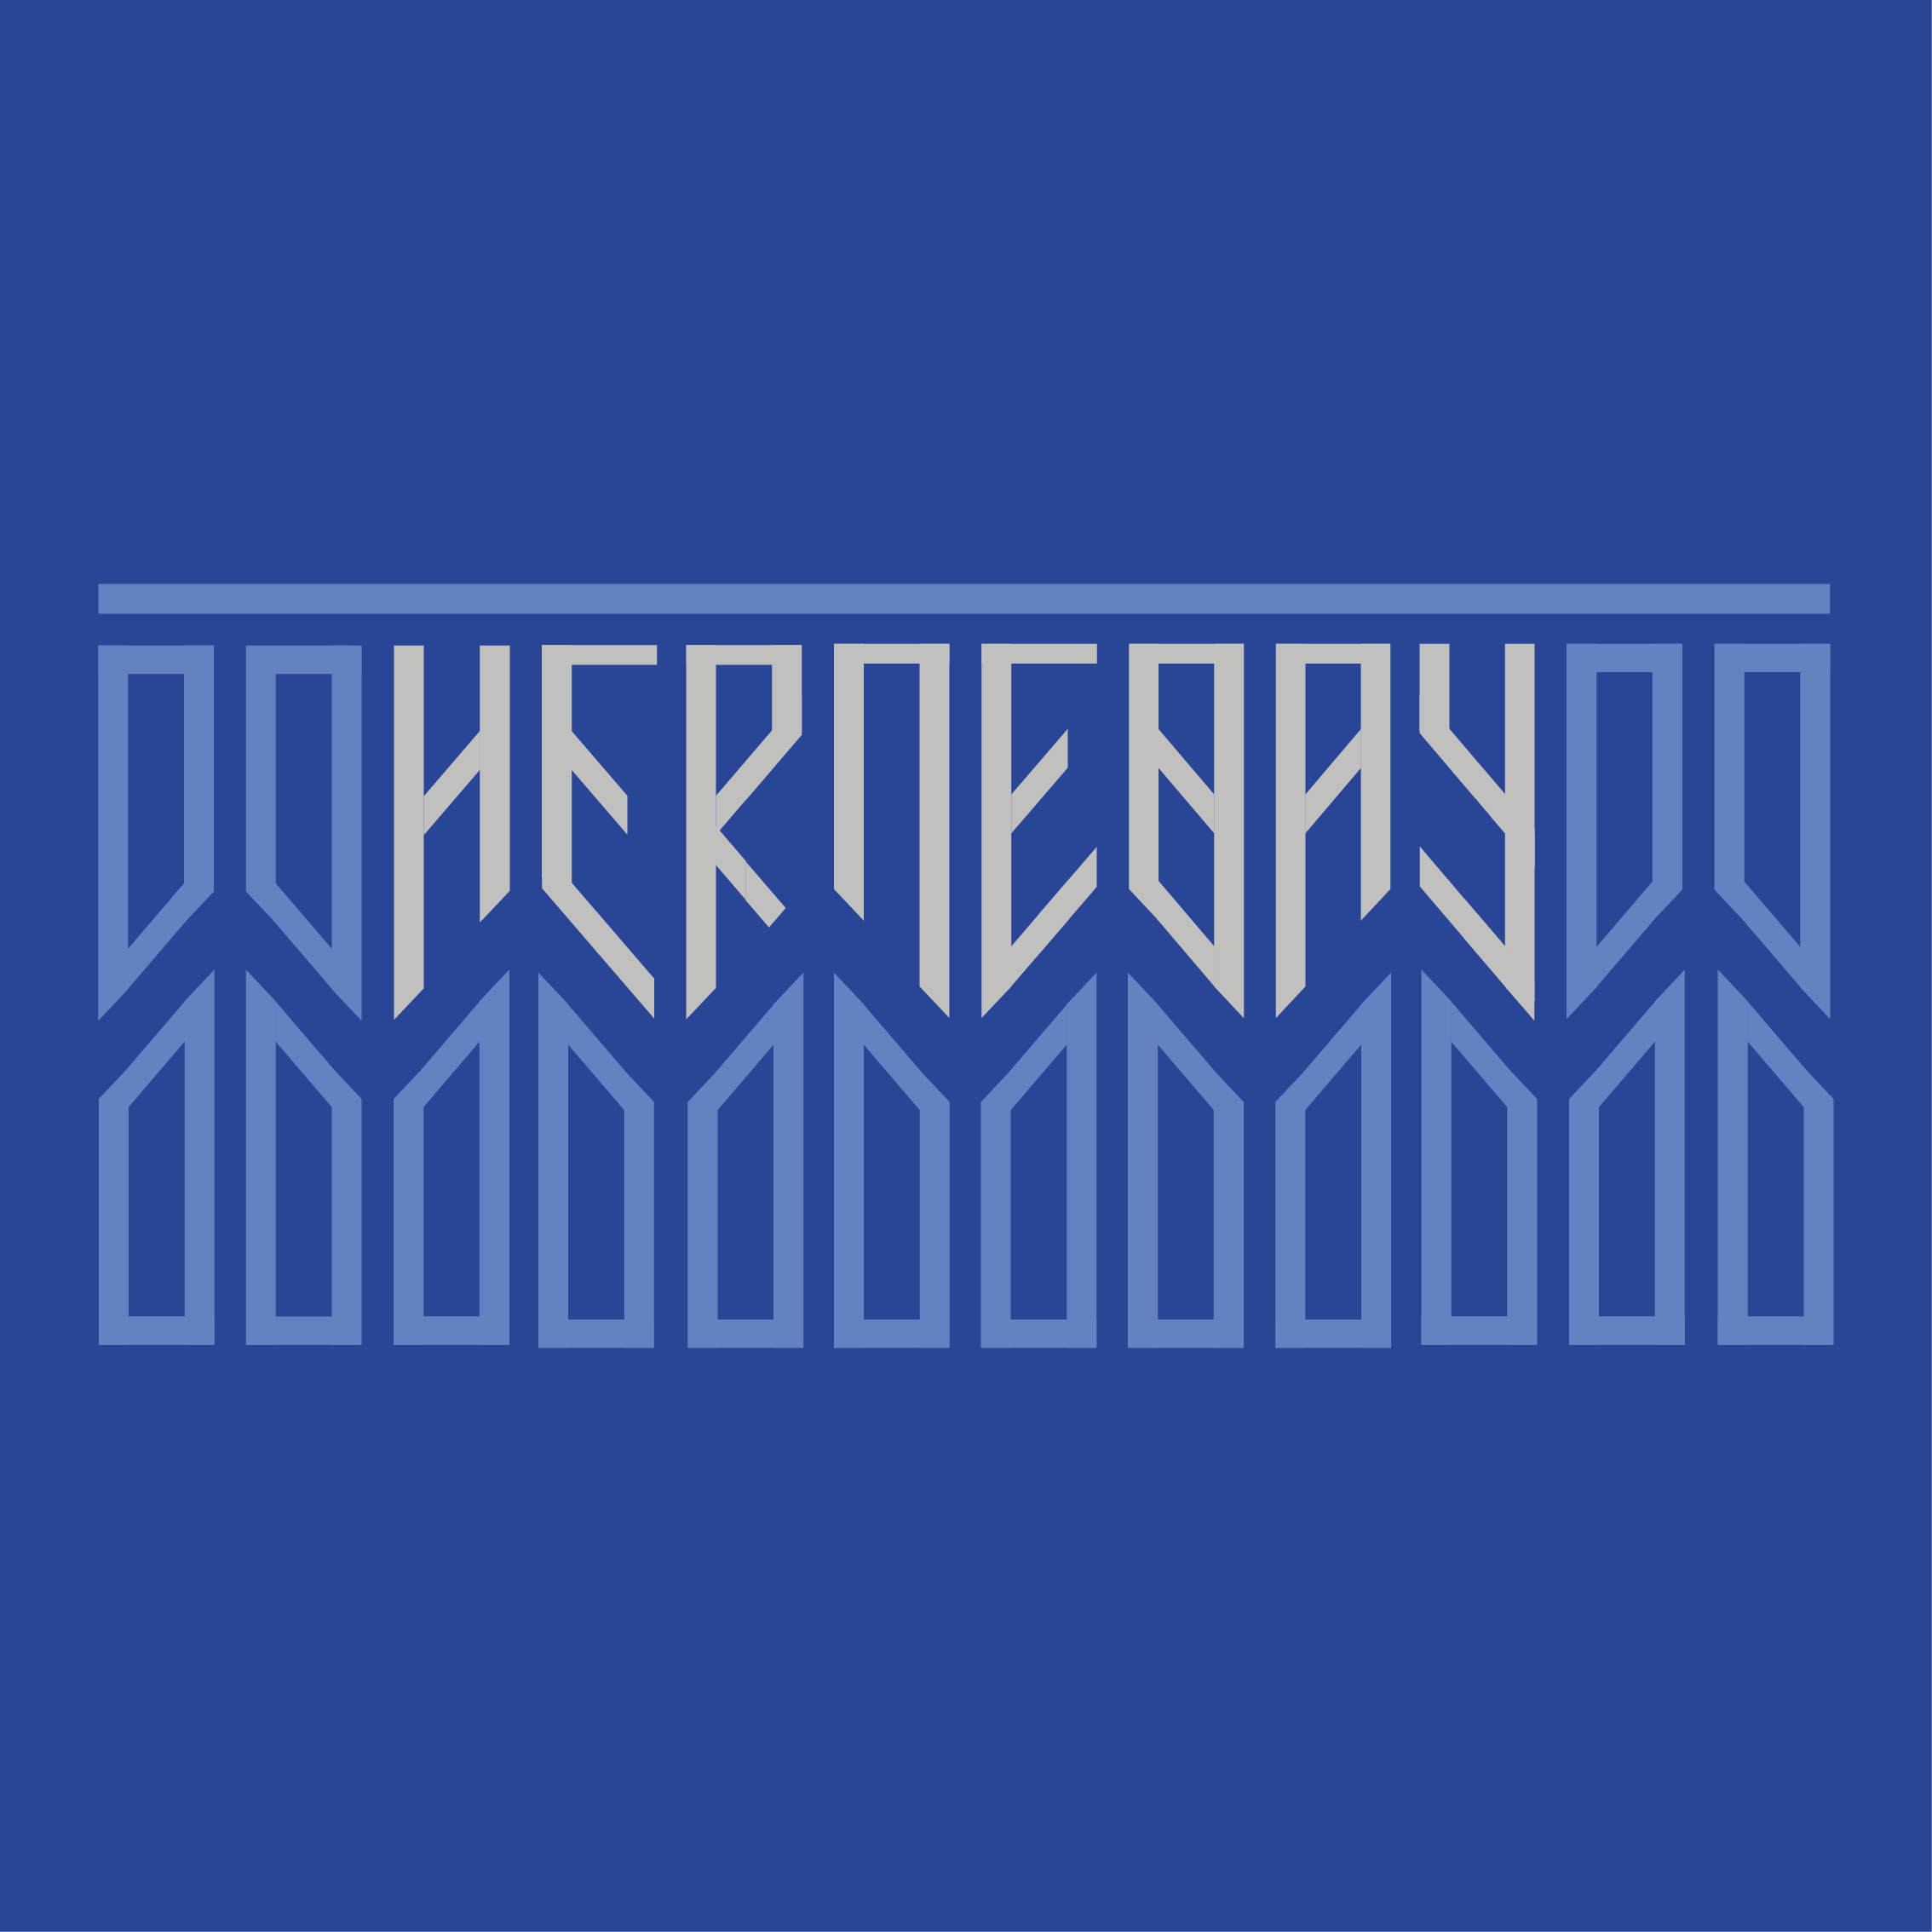 Logo Typography By Fin Norton showing the Herne Bay Ice Hockey Club logo. Blue background with angular white type saying 'Herne Bay' and a light blue angular pattern.